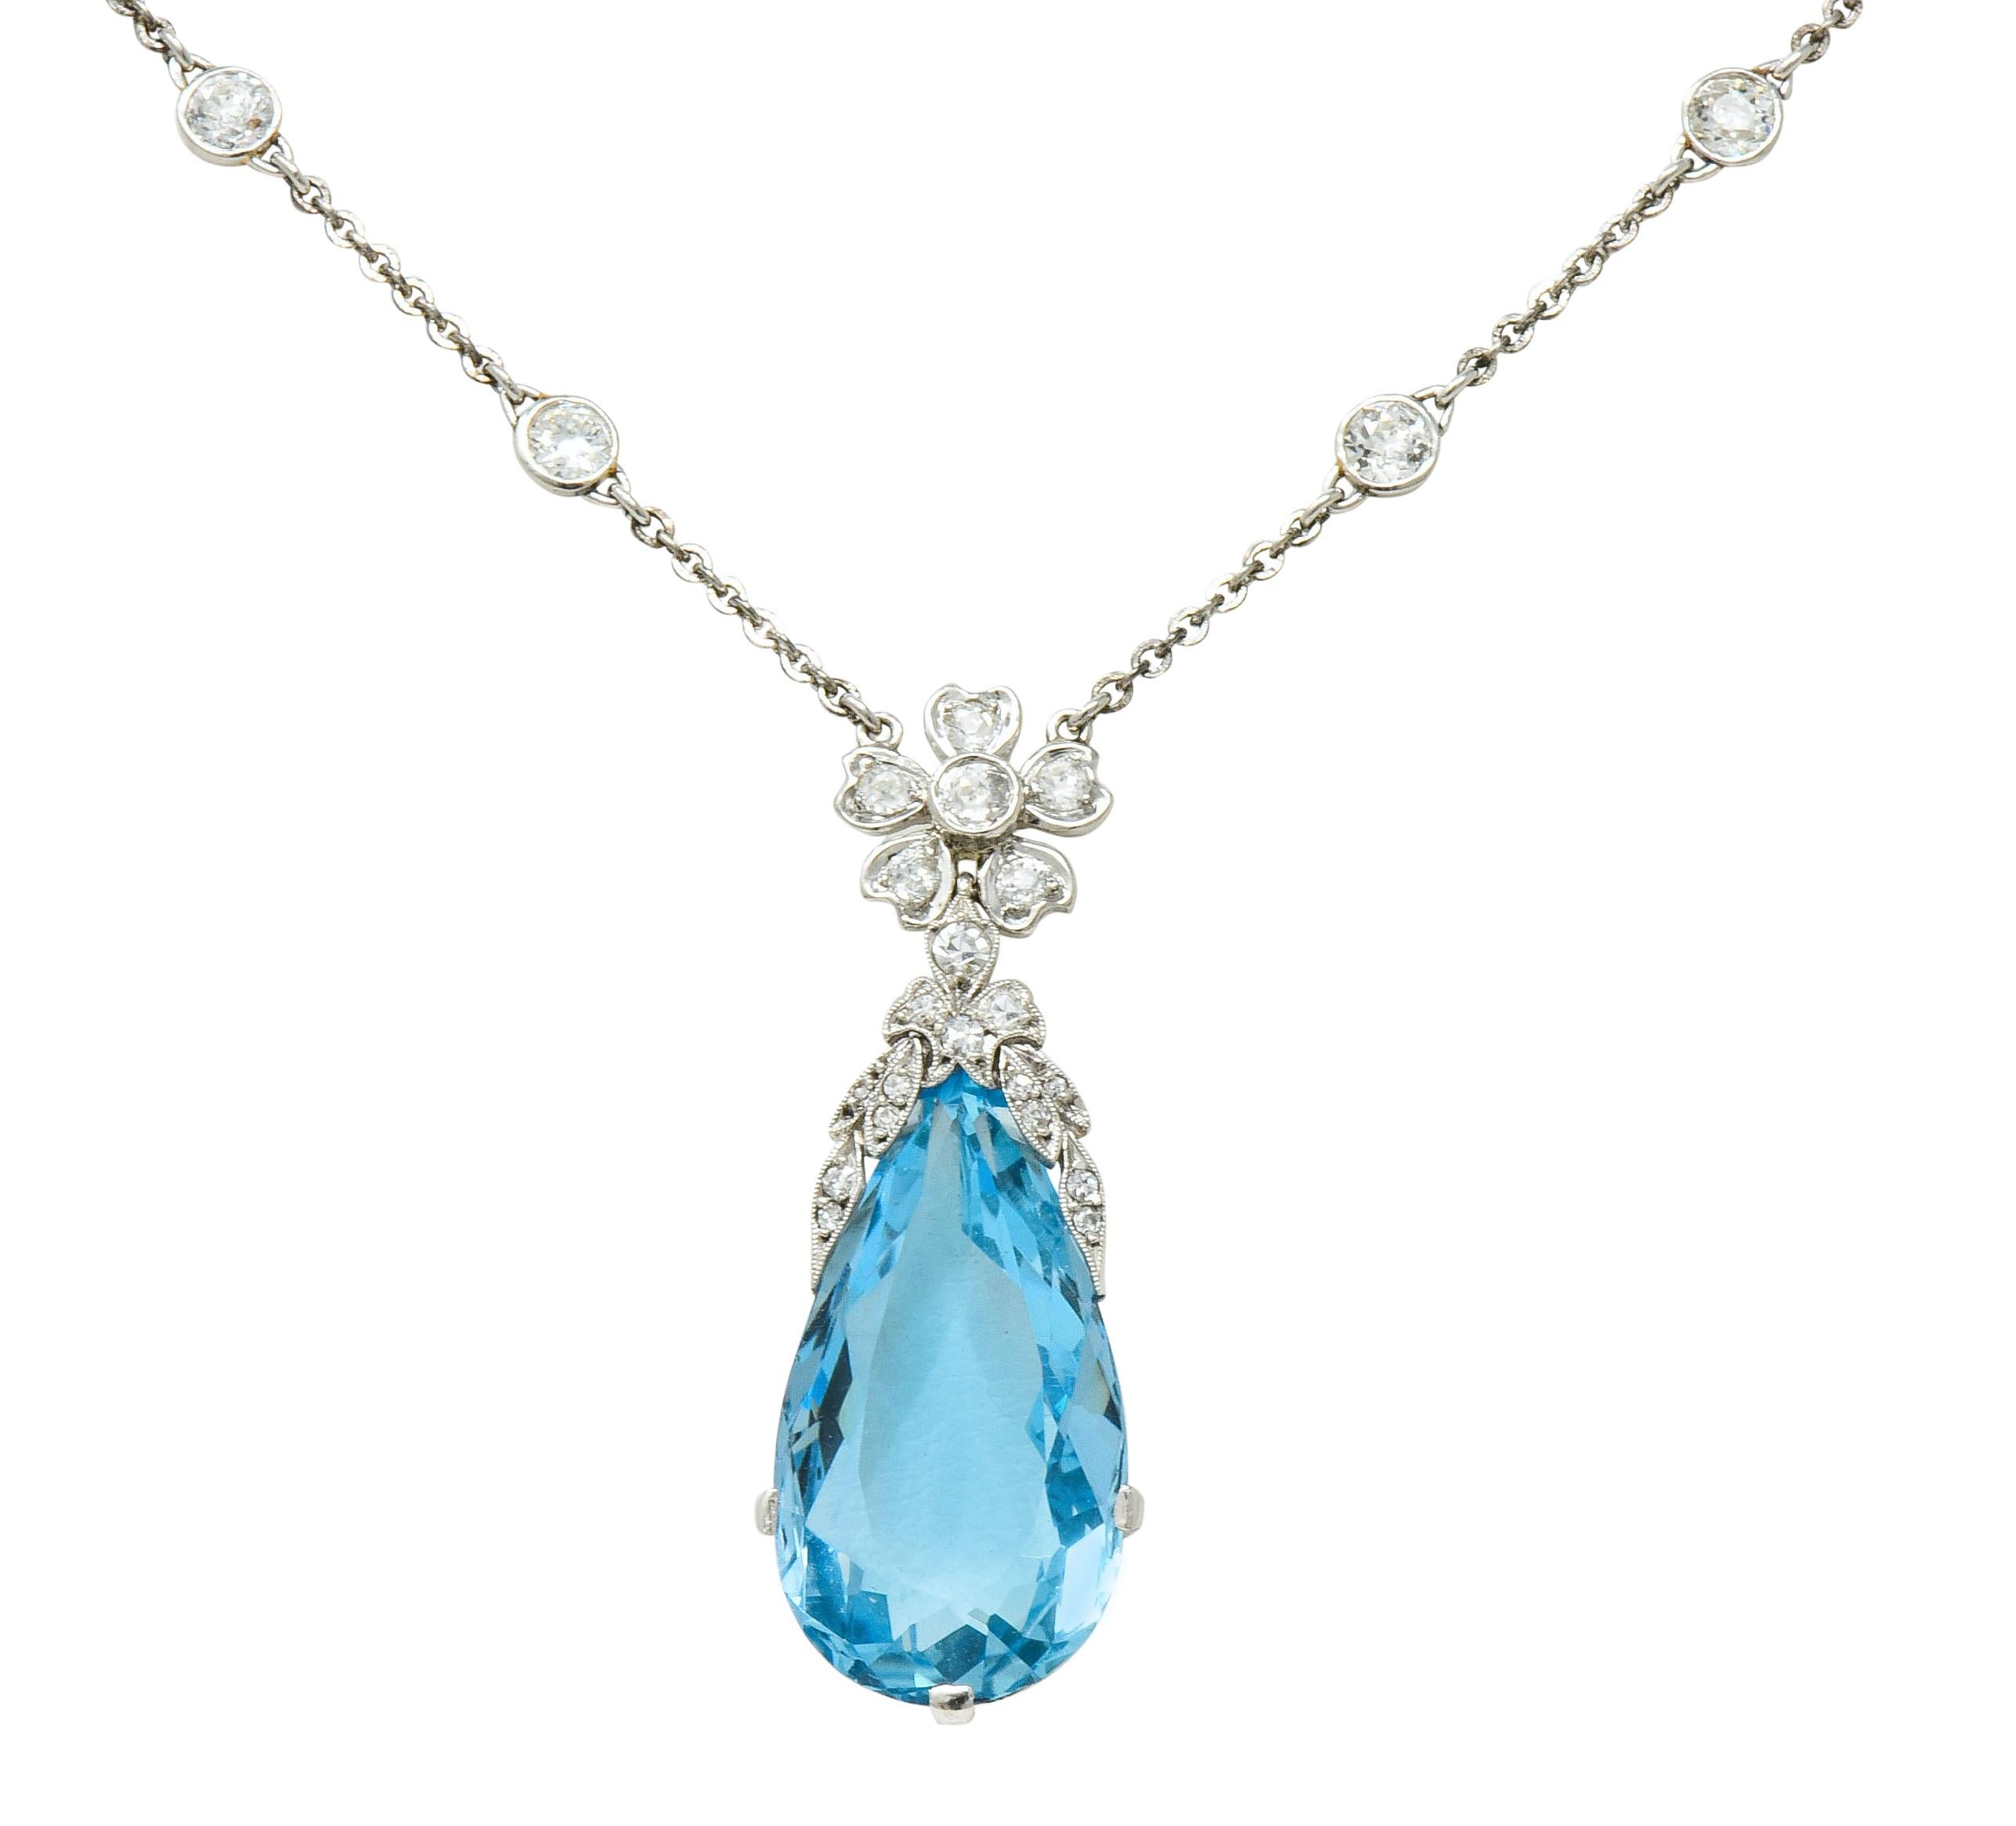 Centering a basket set pear cut aquamarine drop weighing approximately 16.73 carats, transparent and a bright sky blue color

Topped by a foliate and floral motif decorated by milgrain and set throughout by single cut and old European cut diamonds